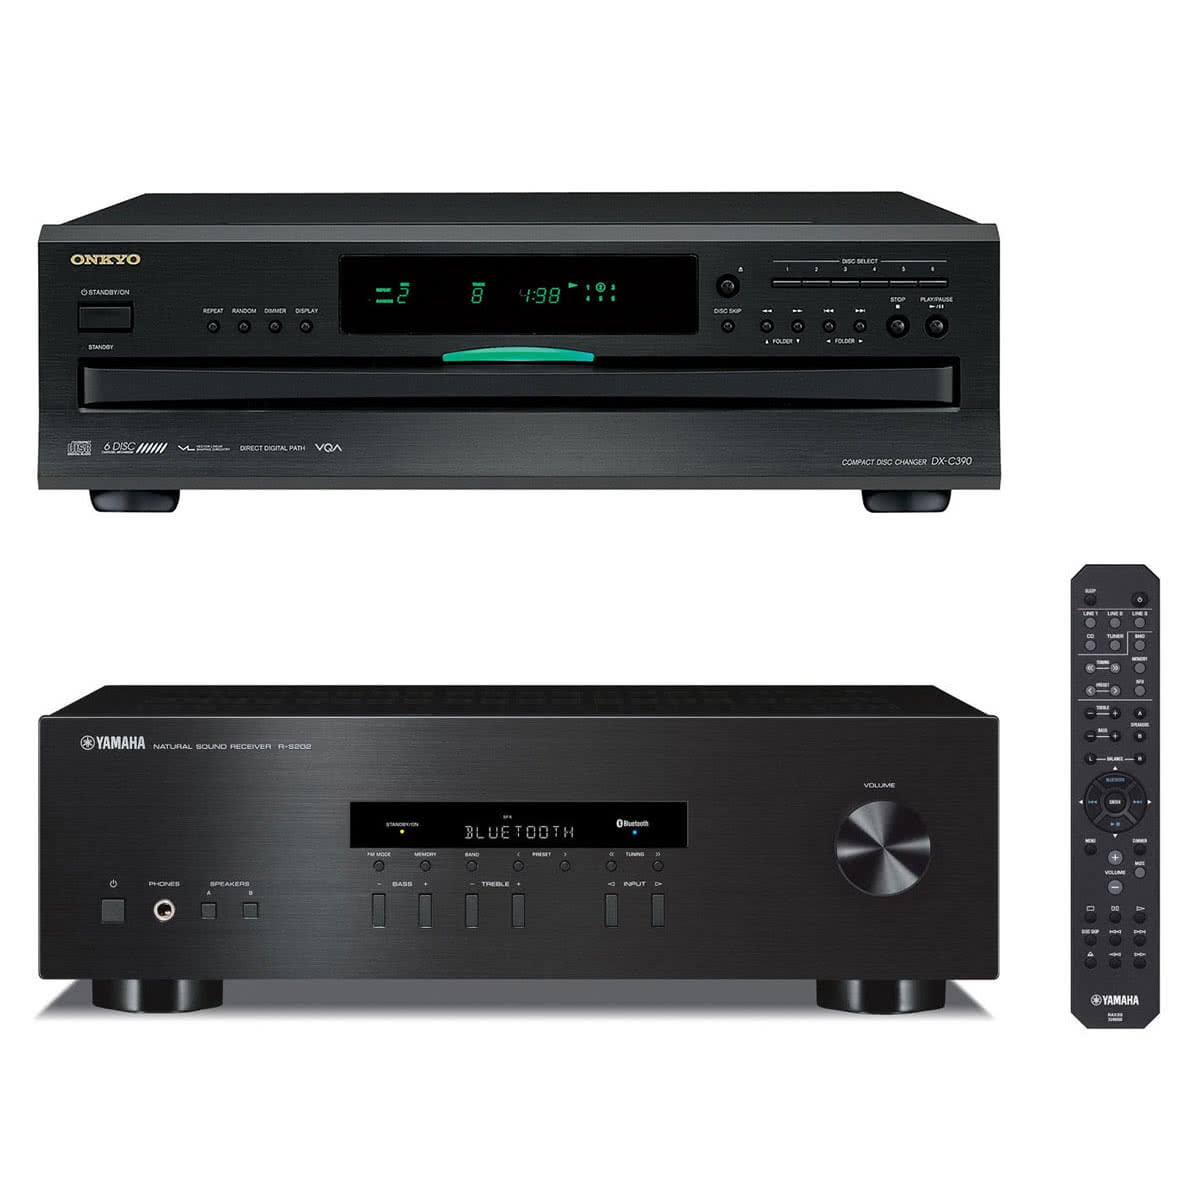 Yamaha R-S202 Stereo Receiver and Onkyo DX-C390 6-Disc Carousel CD Changer